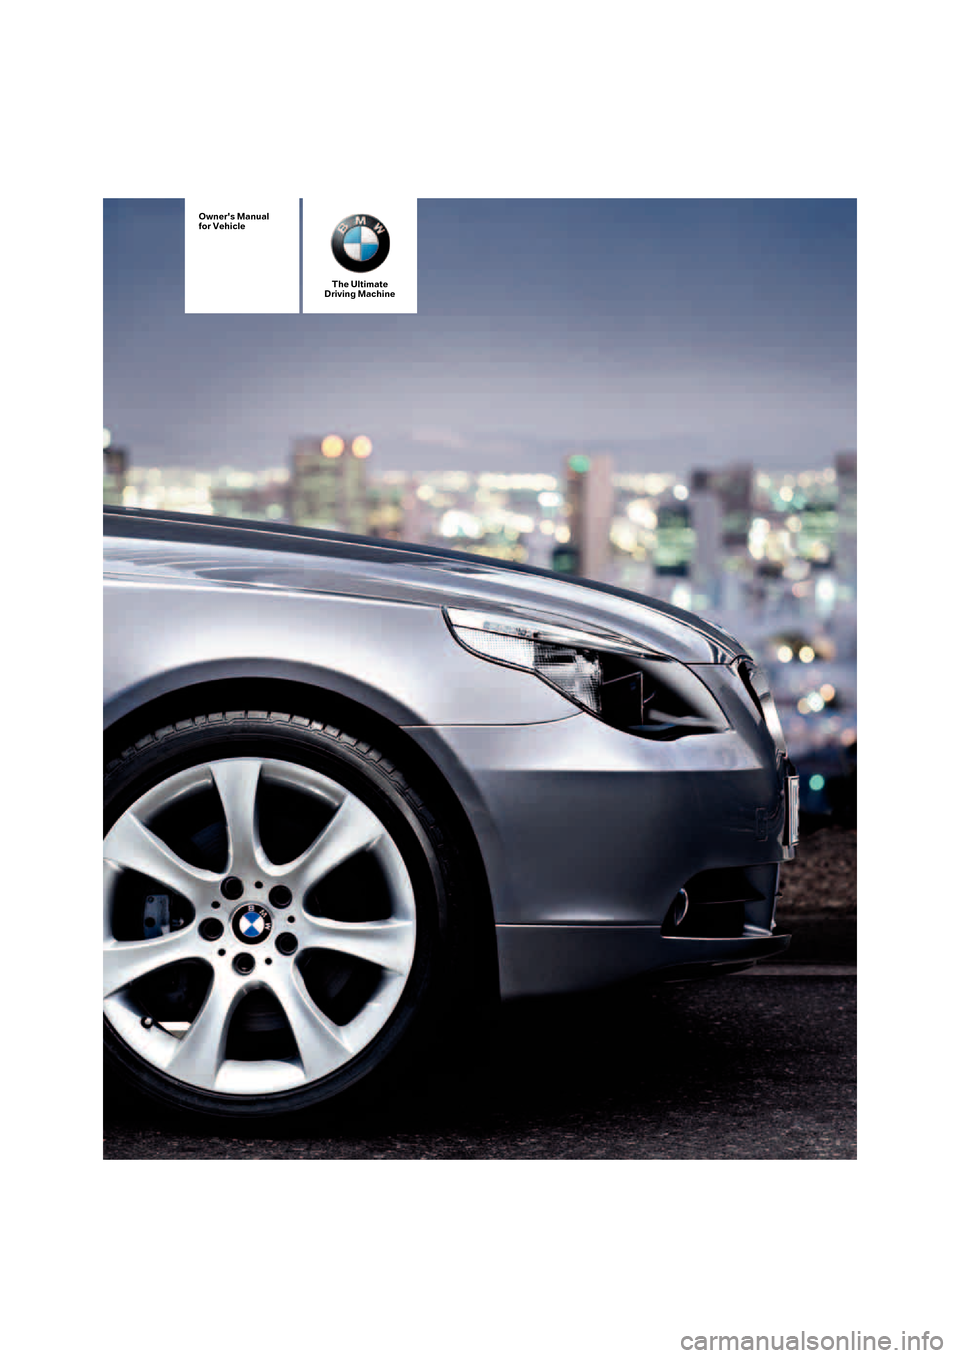 BMW 525I SEDAN 2006 E60 Owners Manual The Ultimate
Driving Machine
Owners Manual
for Vehicle 